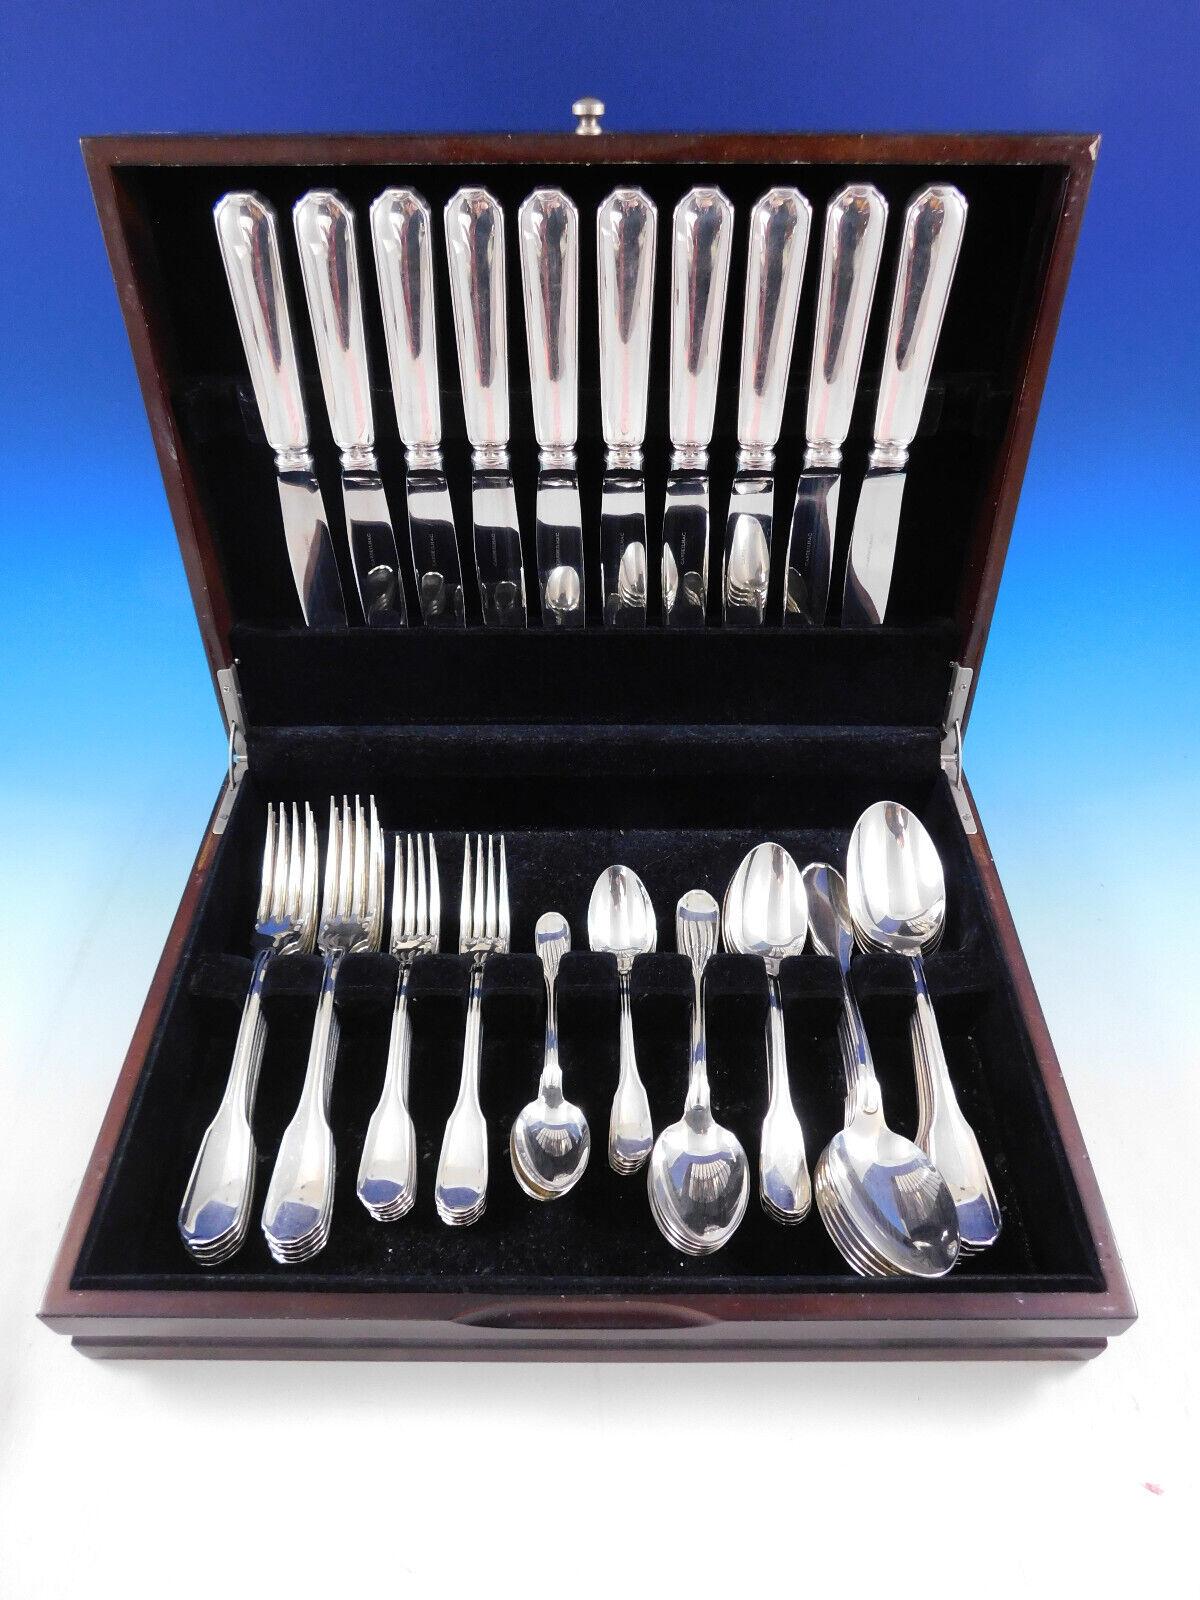 Superb dinner size Germain by Cardeilhac sterling silver flatware set - 60 pieces. This set includes:

10 Large Dinner Knives, 9 3/4